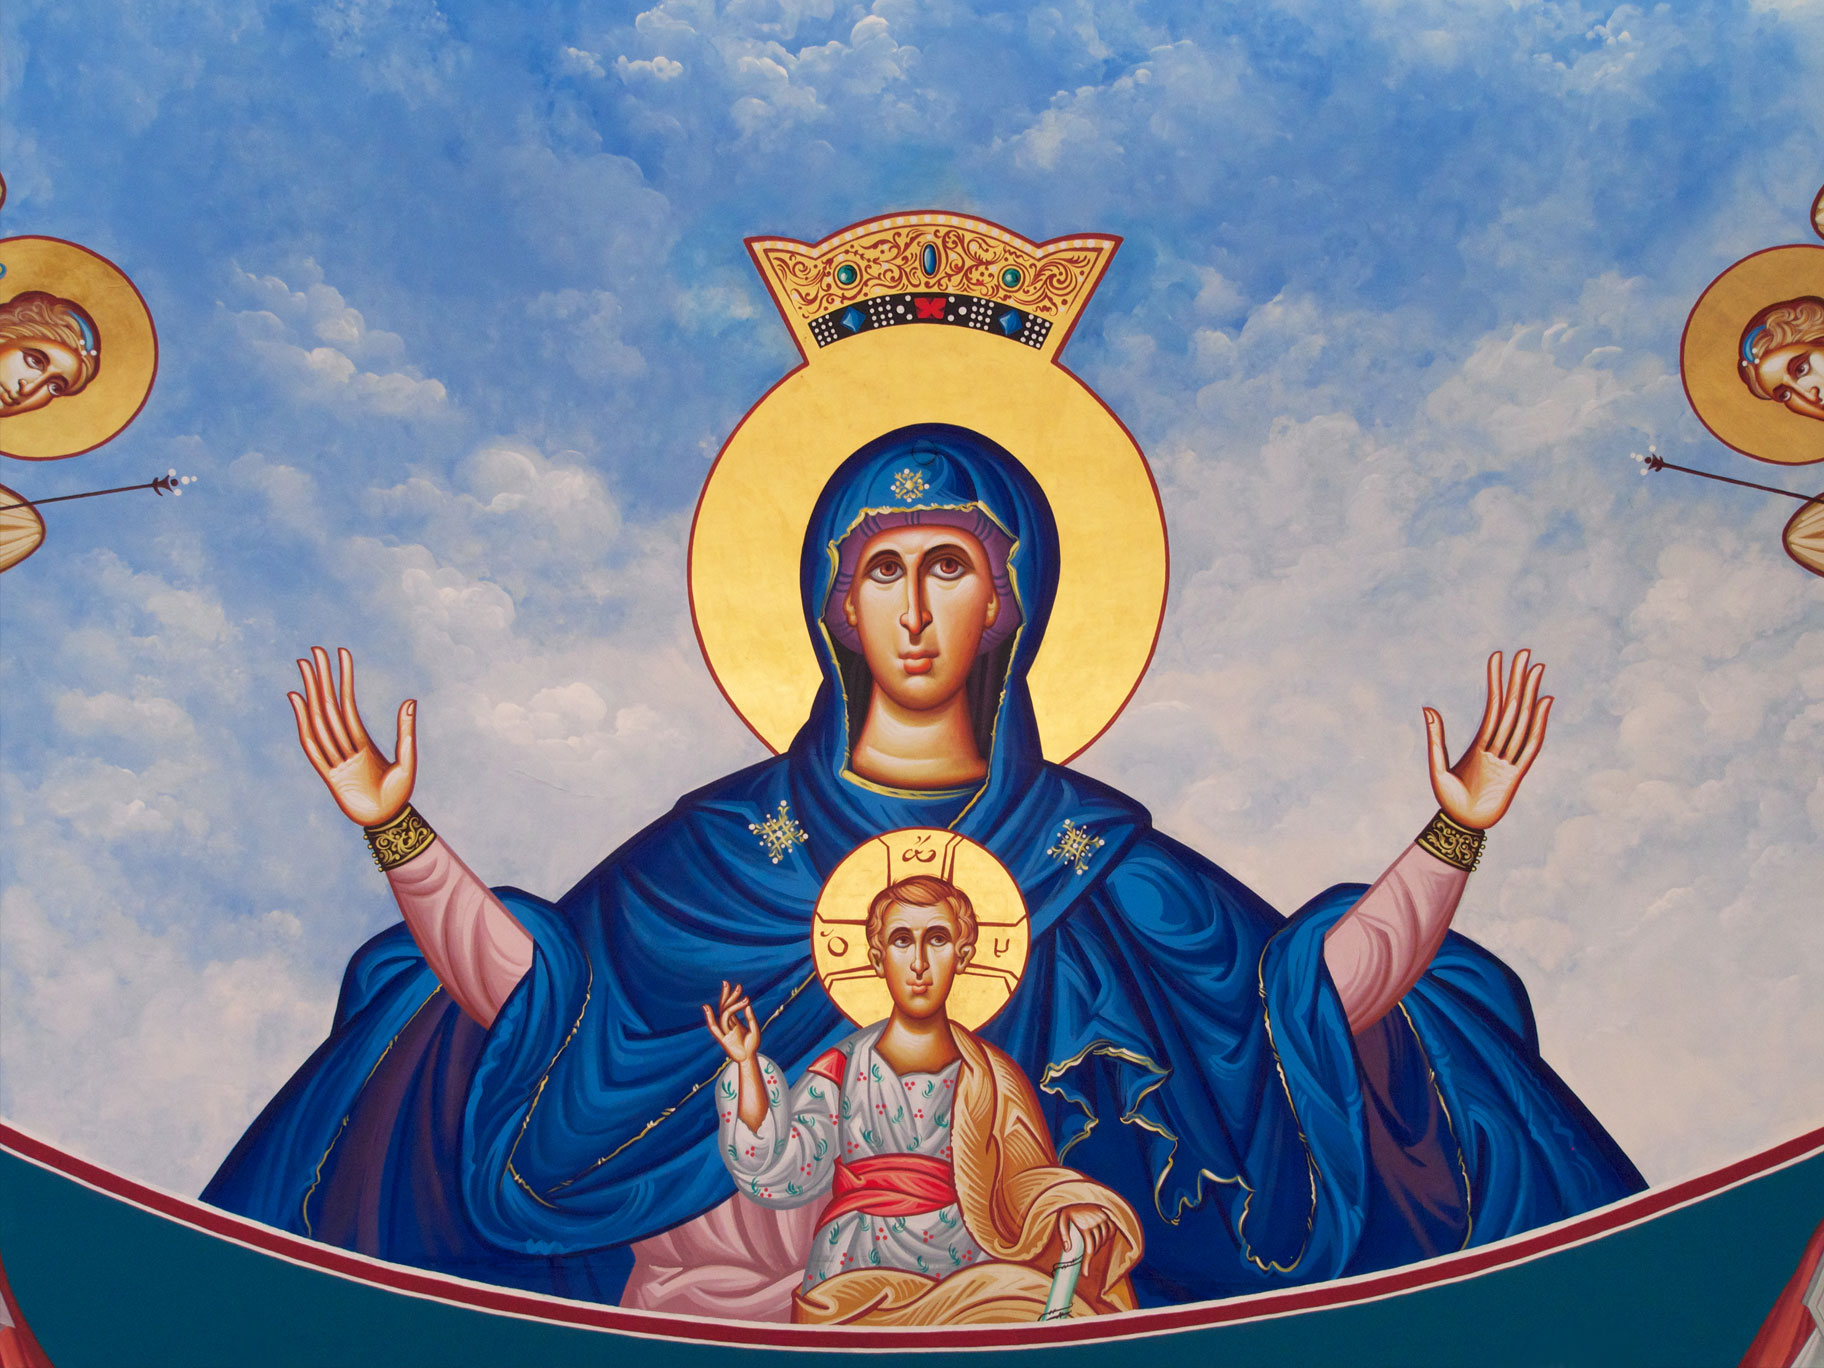 Our community's feast day is celebrated August 15. Ber sure to visit us to honor the Panagia.